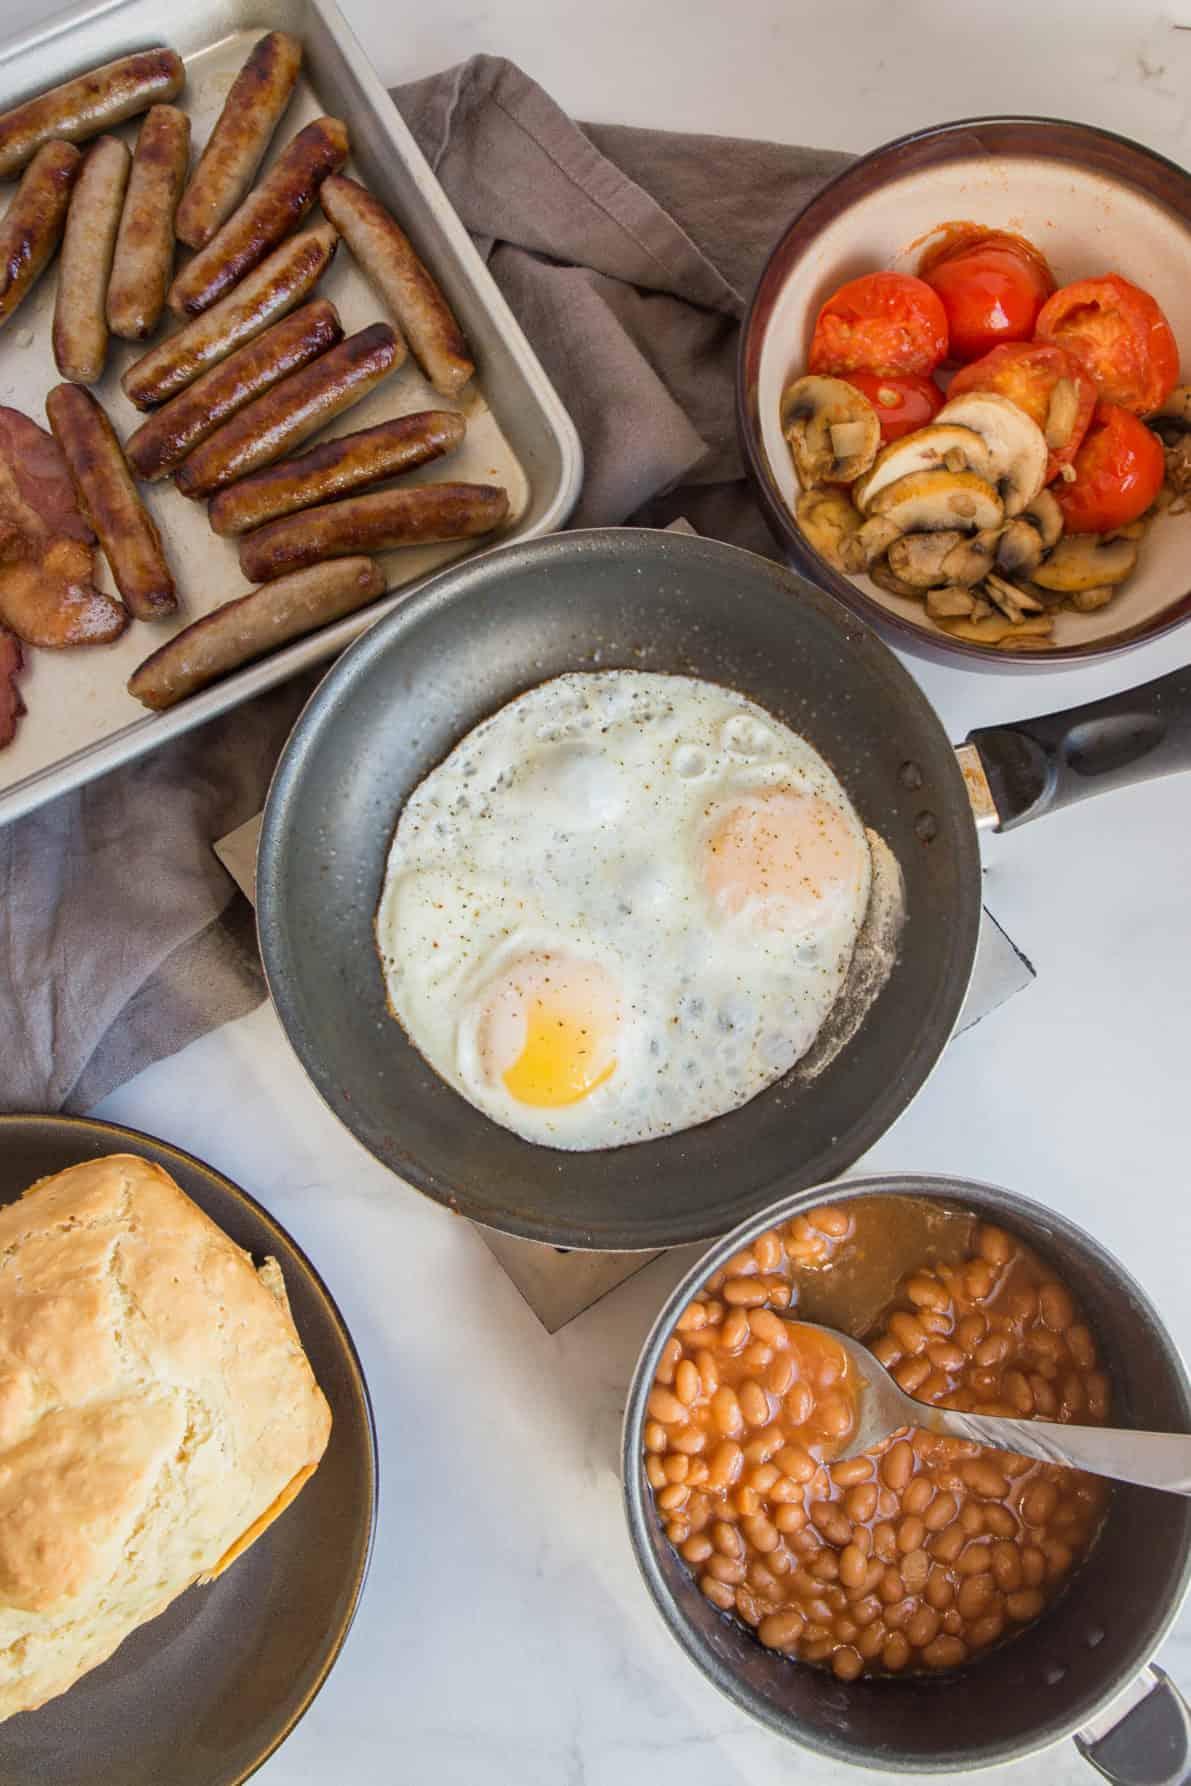 A complete Irish Breakfast laid out before serving.